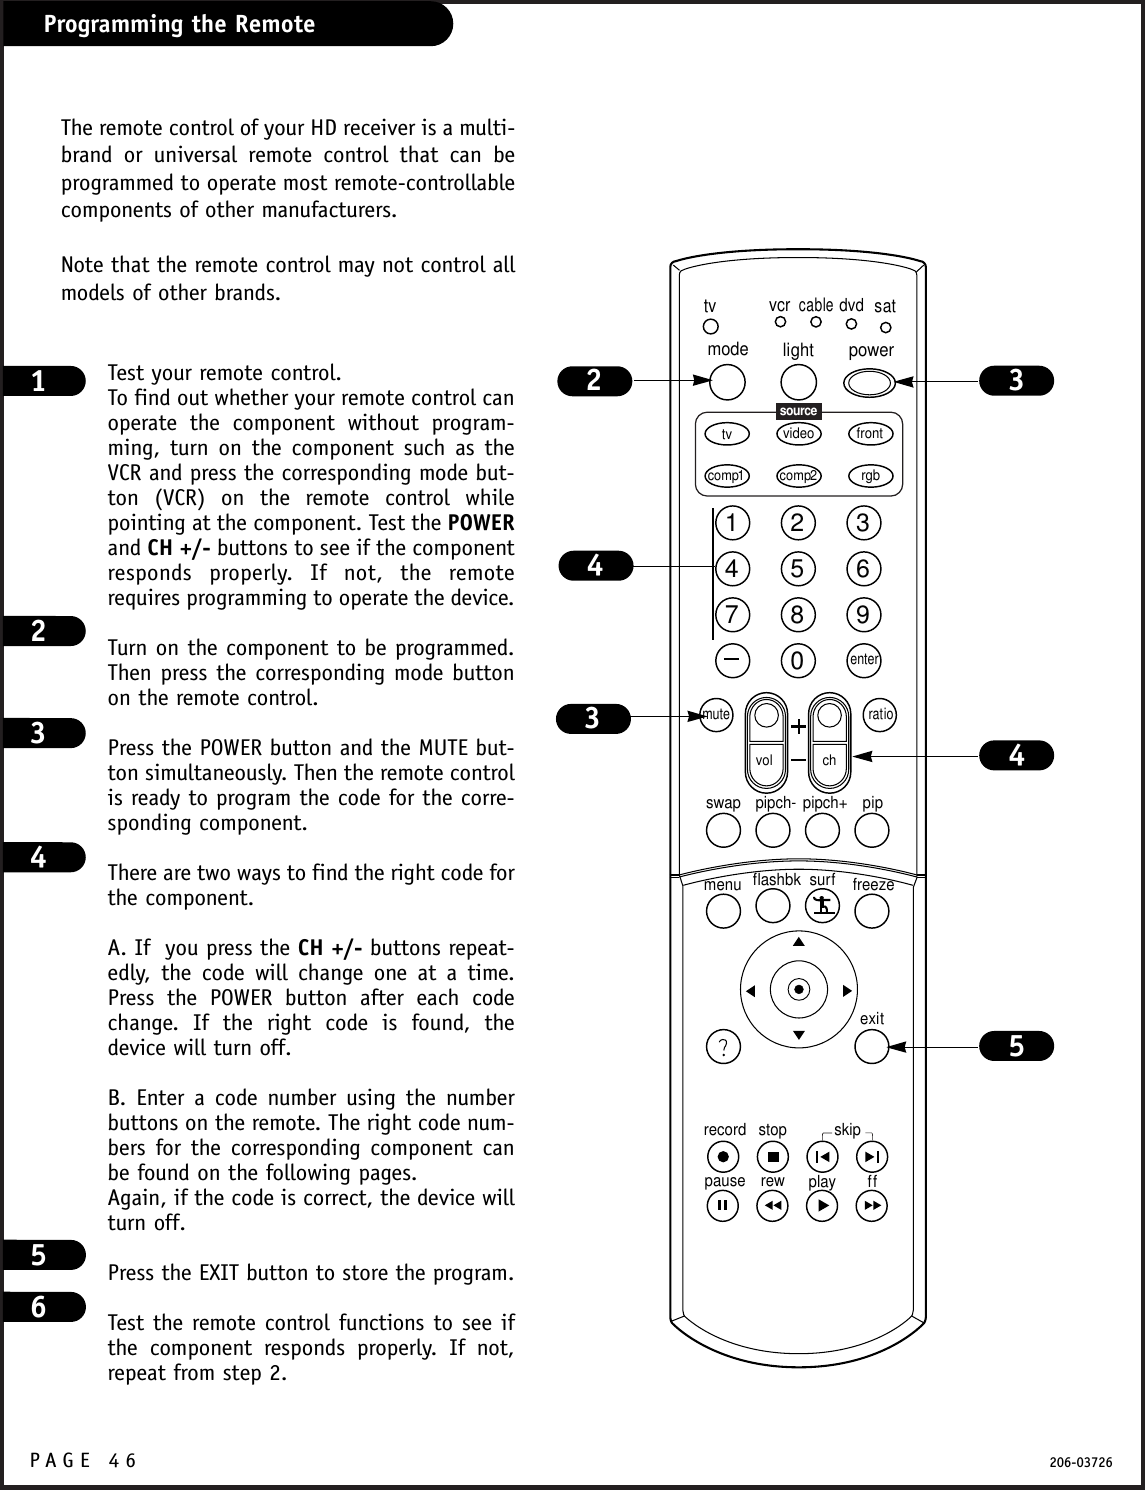 P A GE 46 206-03726Programming the RemoteTest your remote control.To find out whether your remote control canoperate the component without program-ming, turn on the component such as theVCR and press the corresponding mode but-ton (VCR) on the remote control whilepointing at the component. Test the POWERand CH +/- buttons to see if the componentresponds properly. If not, the remoterequires programming to operate the device.Turn on the component to be programmed.Then press the corresponding mode buttonon the remote control.Press the POWER button and the MUTE but-ton simultaneously. Then the remote controlis ready to program the code for the corre-sponding component.There are two ways to find the right code forthe component.A. If  you press the CH +/- buttons repeat-edly, the code will change one at a time.Press the POWER button after each codechange. If the right code is found, thedevice will turn off.B. Enter a code number using the numberbuttons on the remote. The right code num-bers for the corresponding component canbe found on the following pages.Again, if the code is correct, the device willturn off.Press the EXIT button to store the program.Test the remote control functions to see ifthe component responds properly. If not,repeat from step 2.11234567890tvmode light power   tv video frontcomp1 rgbvcrcabledvd satmuteswap pipch- pipch+ pipmenurecord stoppause rew play ffexitflashbk surf freezevol chratiocomp2skipsourceenter2 3453234564The remote control of your HD receiver is a multi-brand or universal remote control that can beprogrammed to operate most remote-controllablecomponents of other manufacturers.Note that the remote control may not control allmodels of other brands.